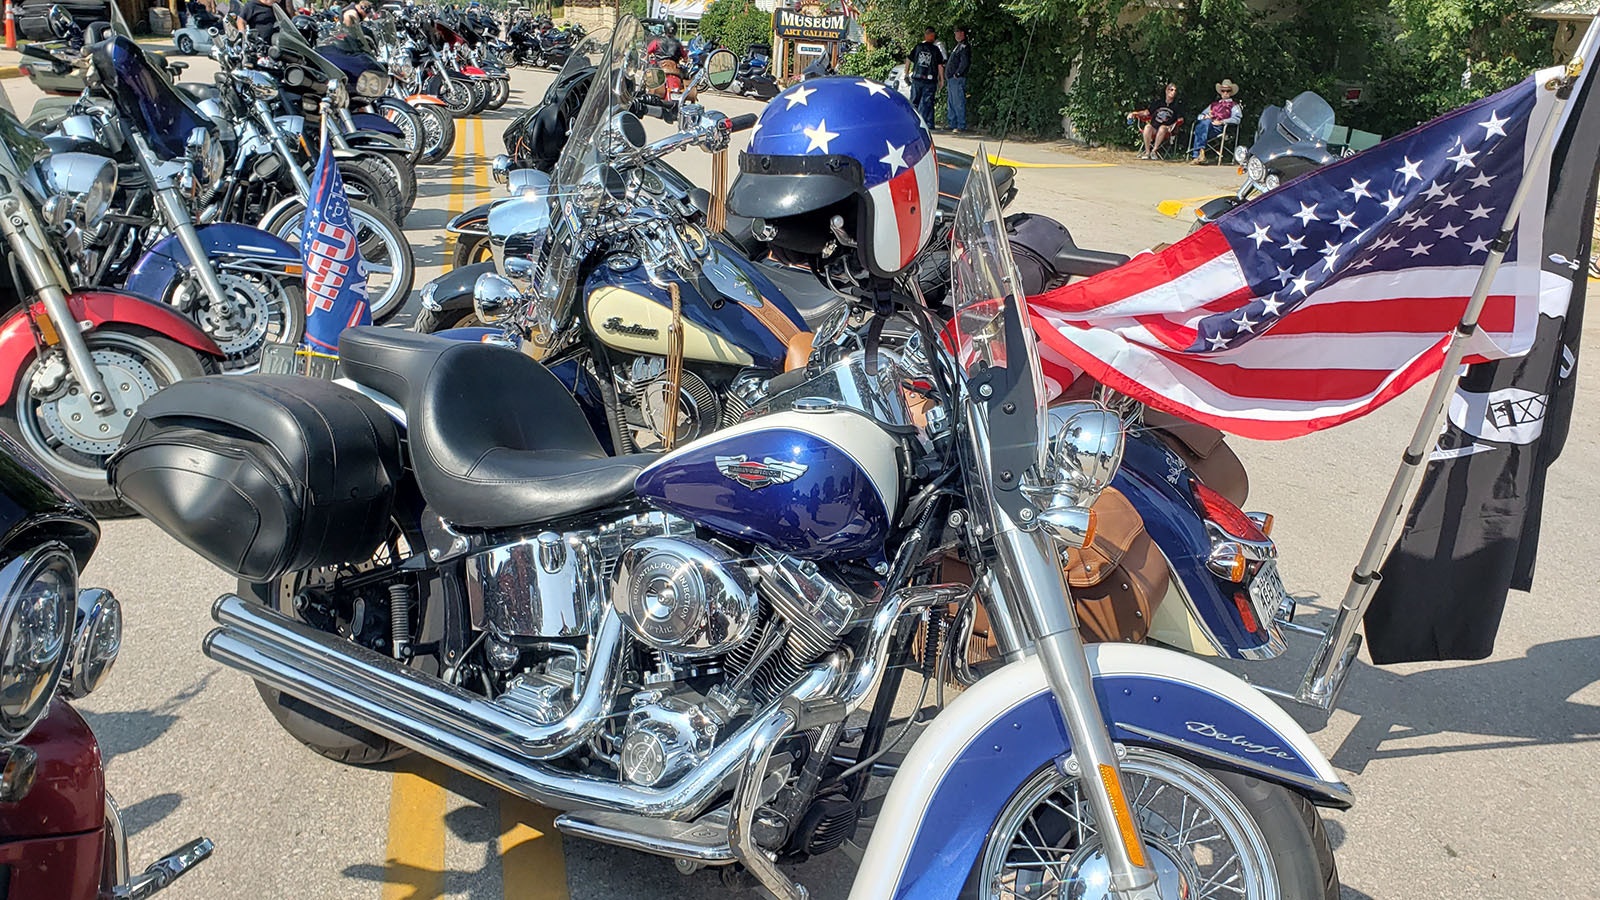 Patriotic swag was common among the Sturgis Motorcycle Rally crowd who see the rally as a great American road trip and an example of great American freedoms.